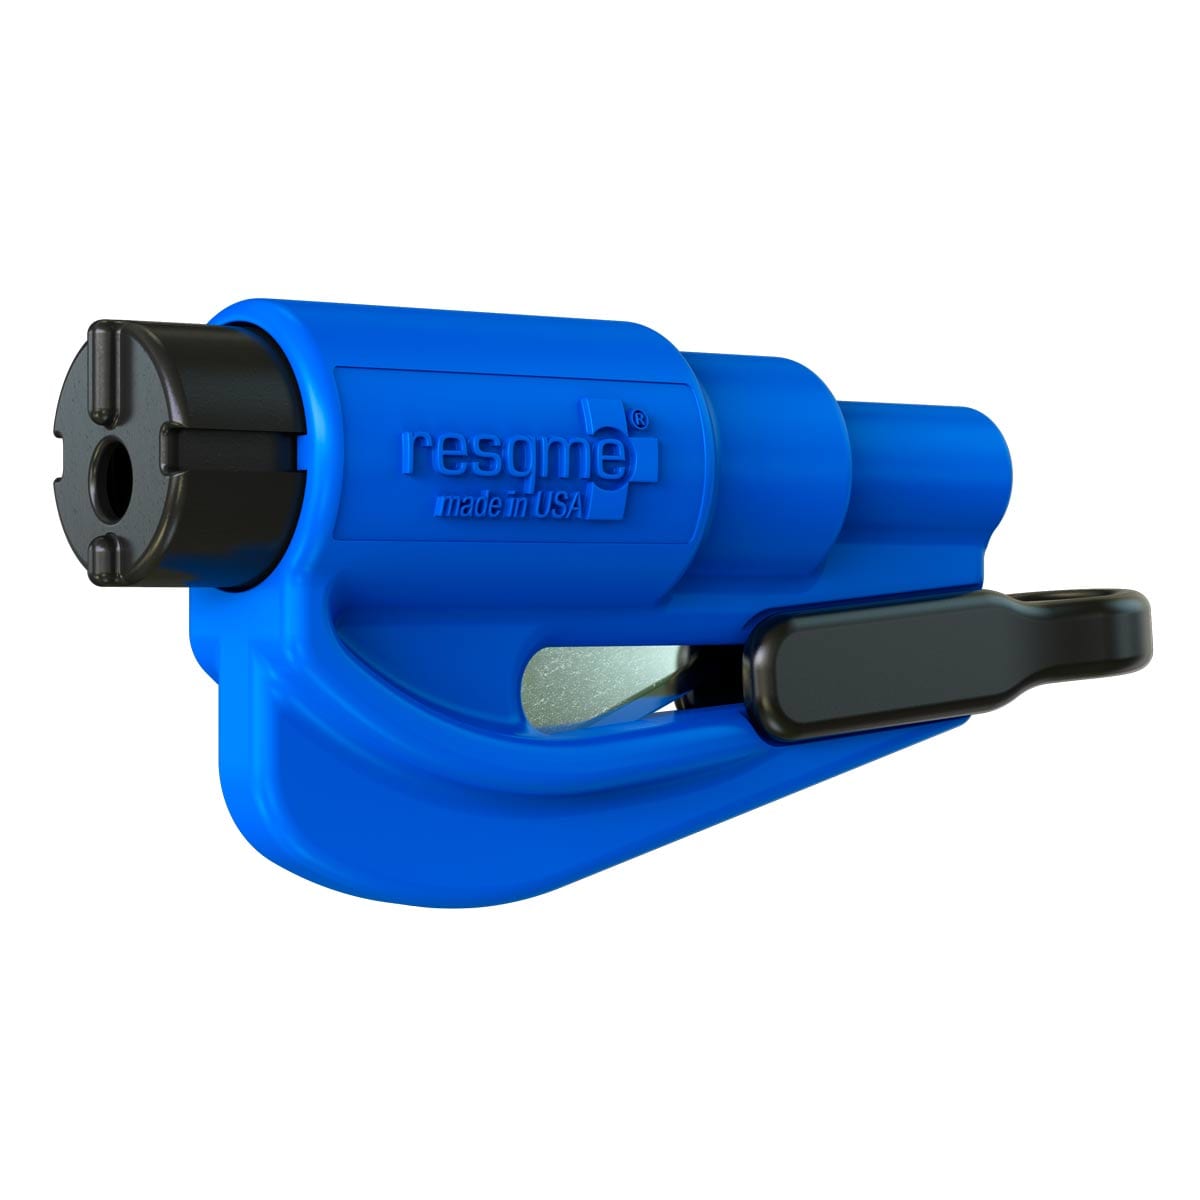  resqme, Inc. 04.100.02 resqme The Original Keychain Car Escape  Tool, Made in USA, adult-unisex (Blue) - Pack of 2 : Automotive